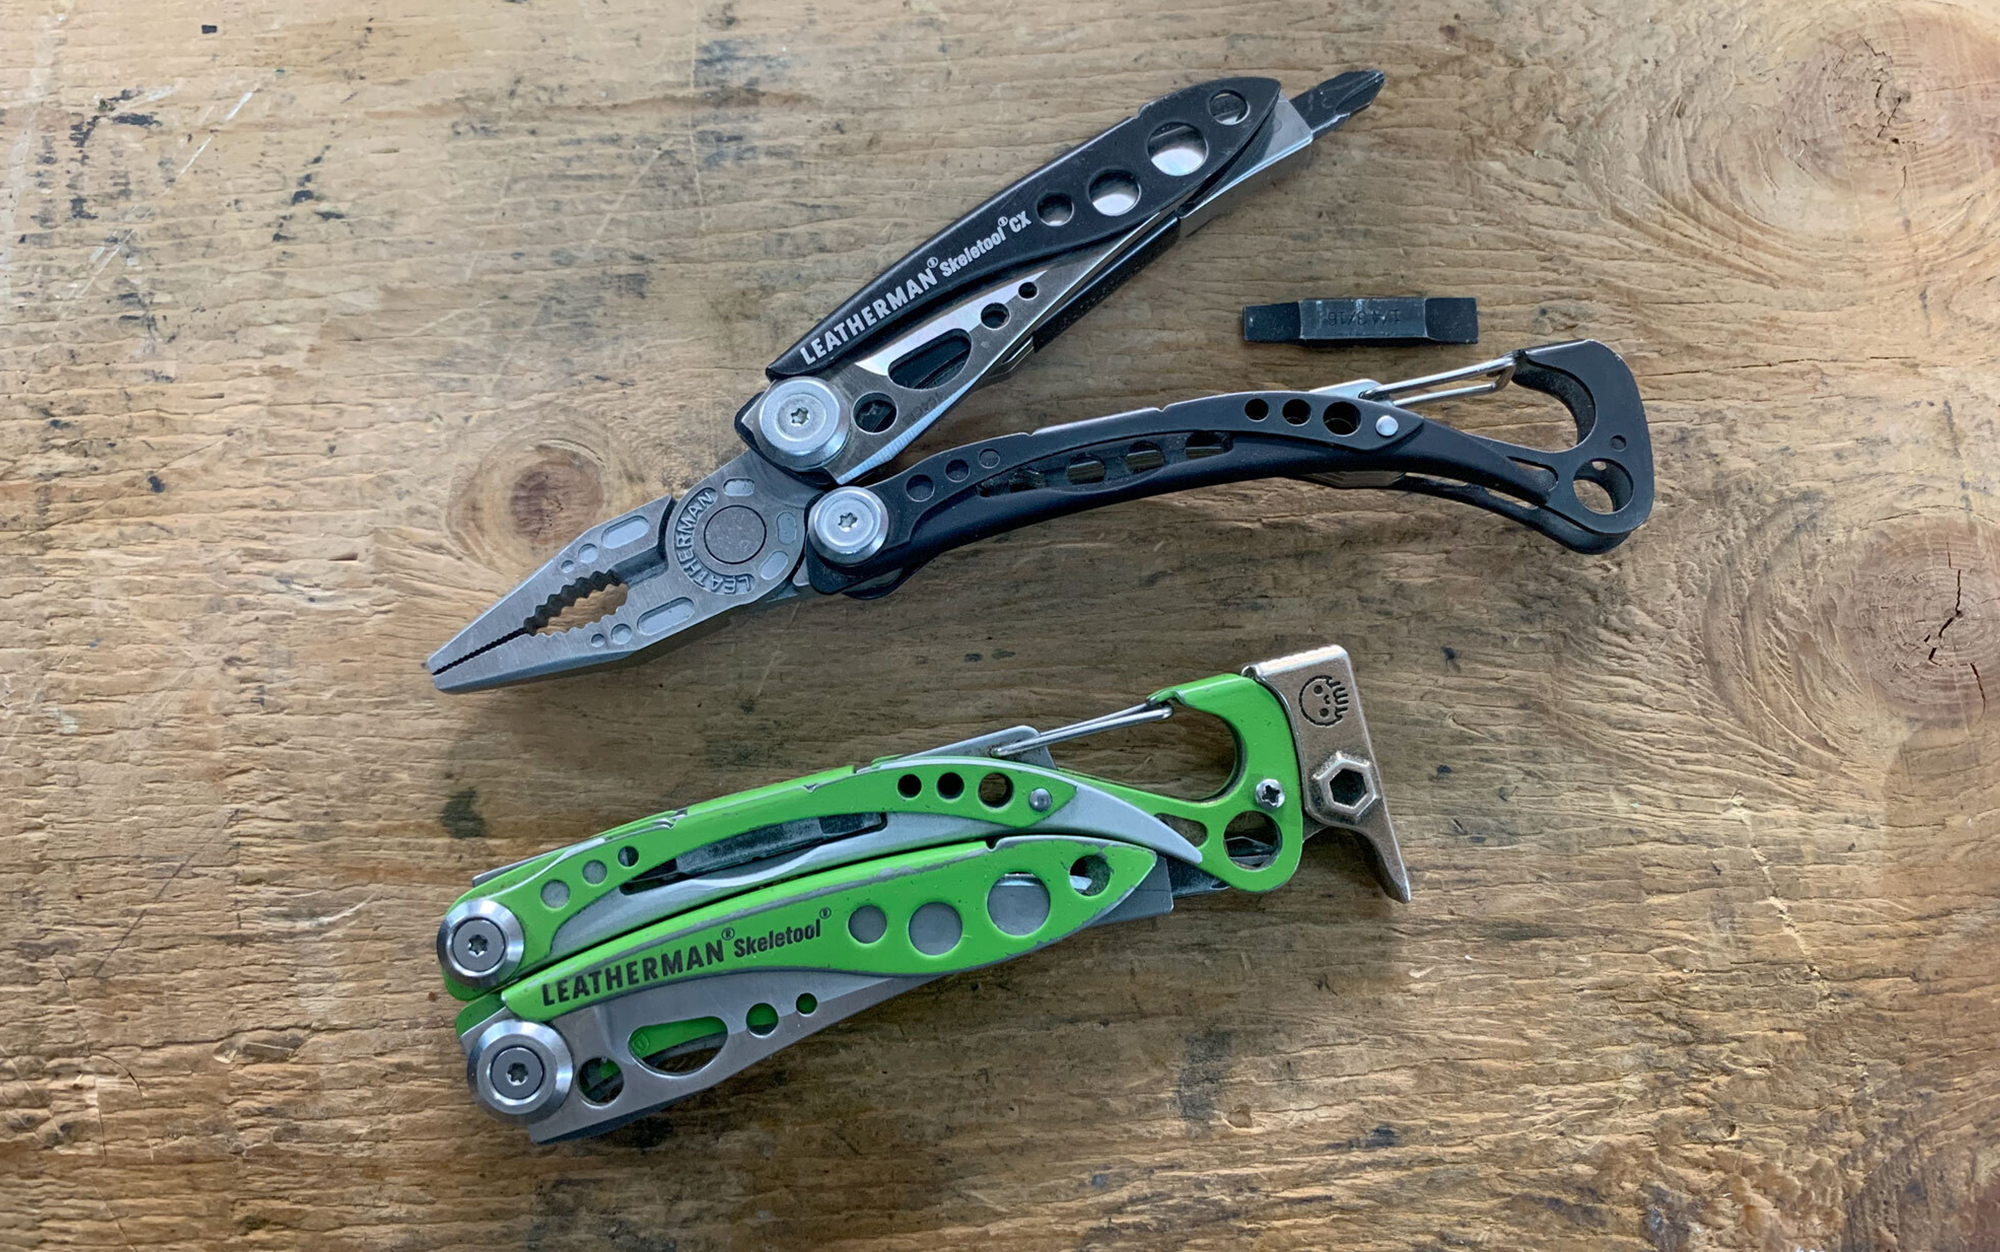 The Leatherman Skeletool CX features a knife blade, needlenose/regular combo pliers with wire cutters, flat bit driver, extra bit storage in handle, and bottle opener.